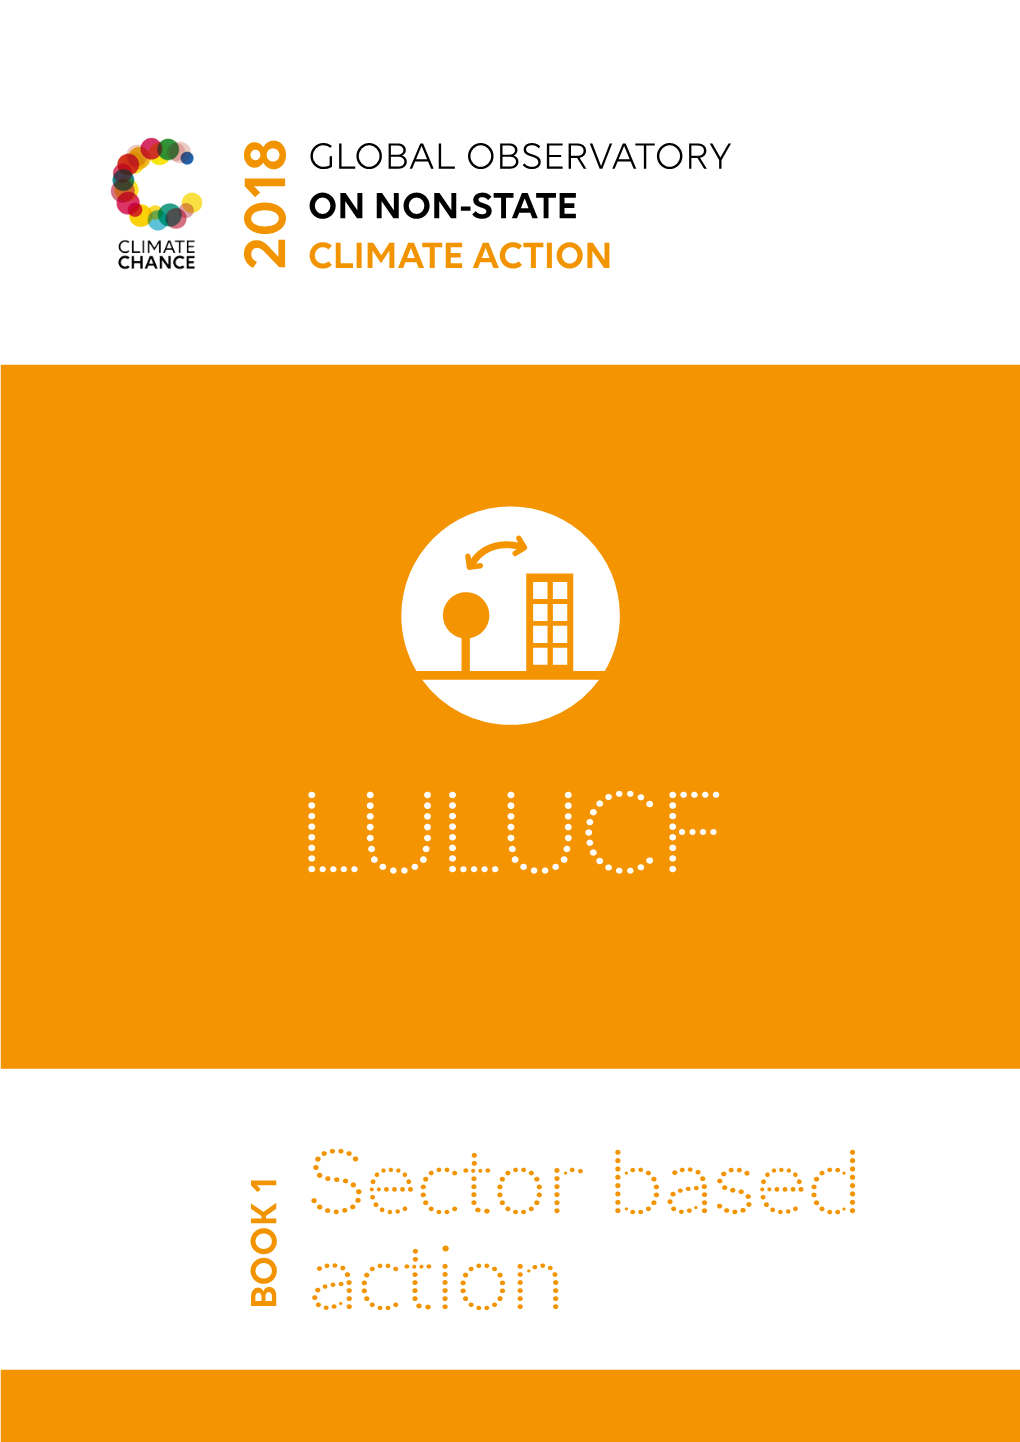 Land Use, Land-Use Change, and Forestry (LULUCF) Sector